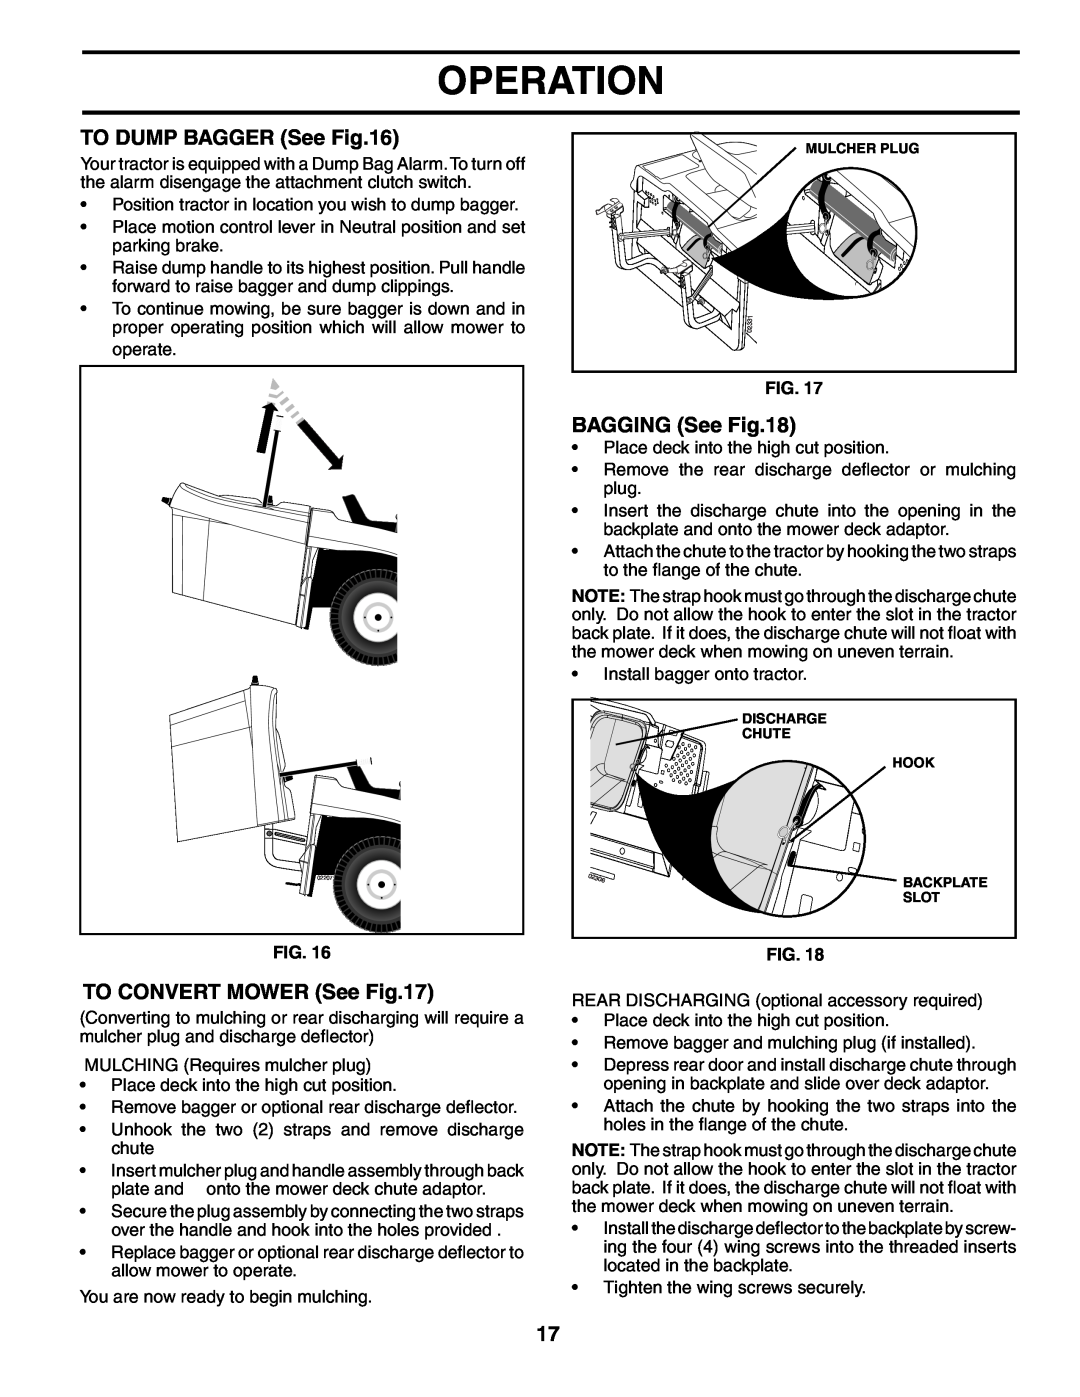 Husqvarna CTH180 XP 02764 owner manual TO DUMP BAGGER See, BAGGING See, TO CONVERT MOWER See, Operation 